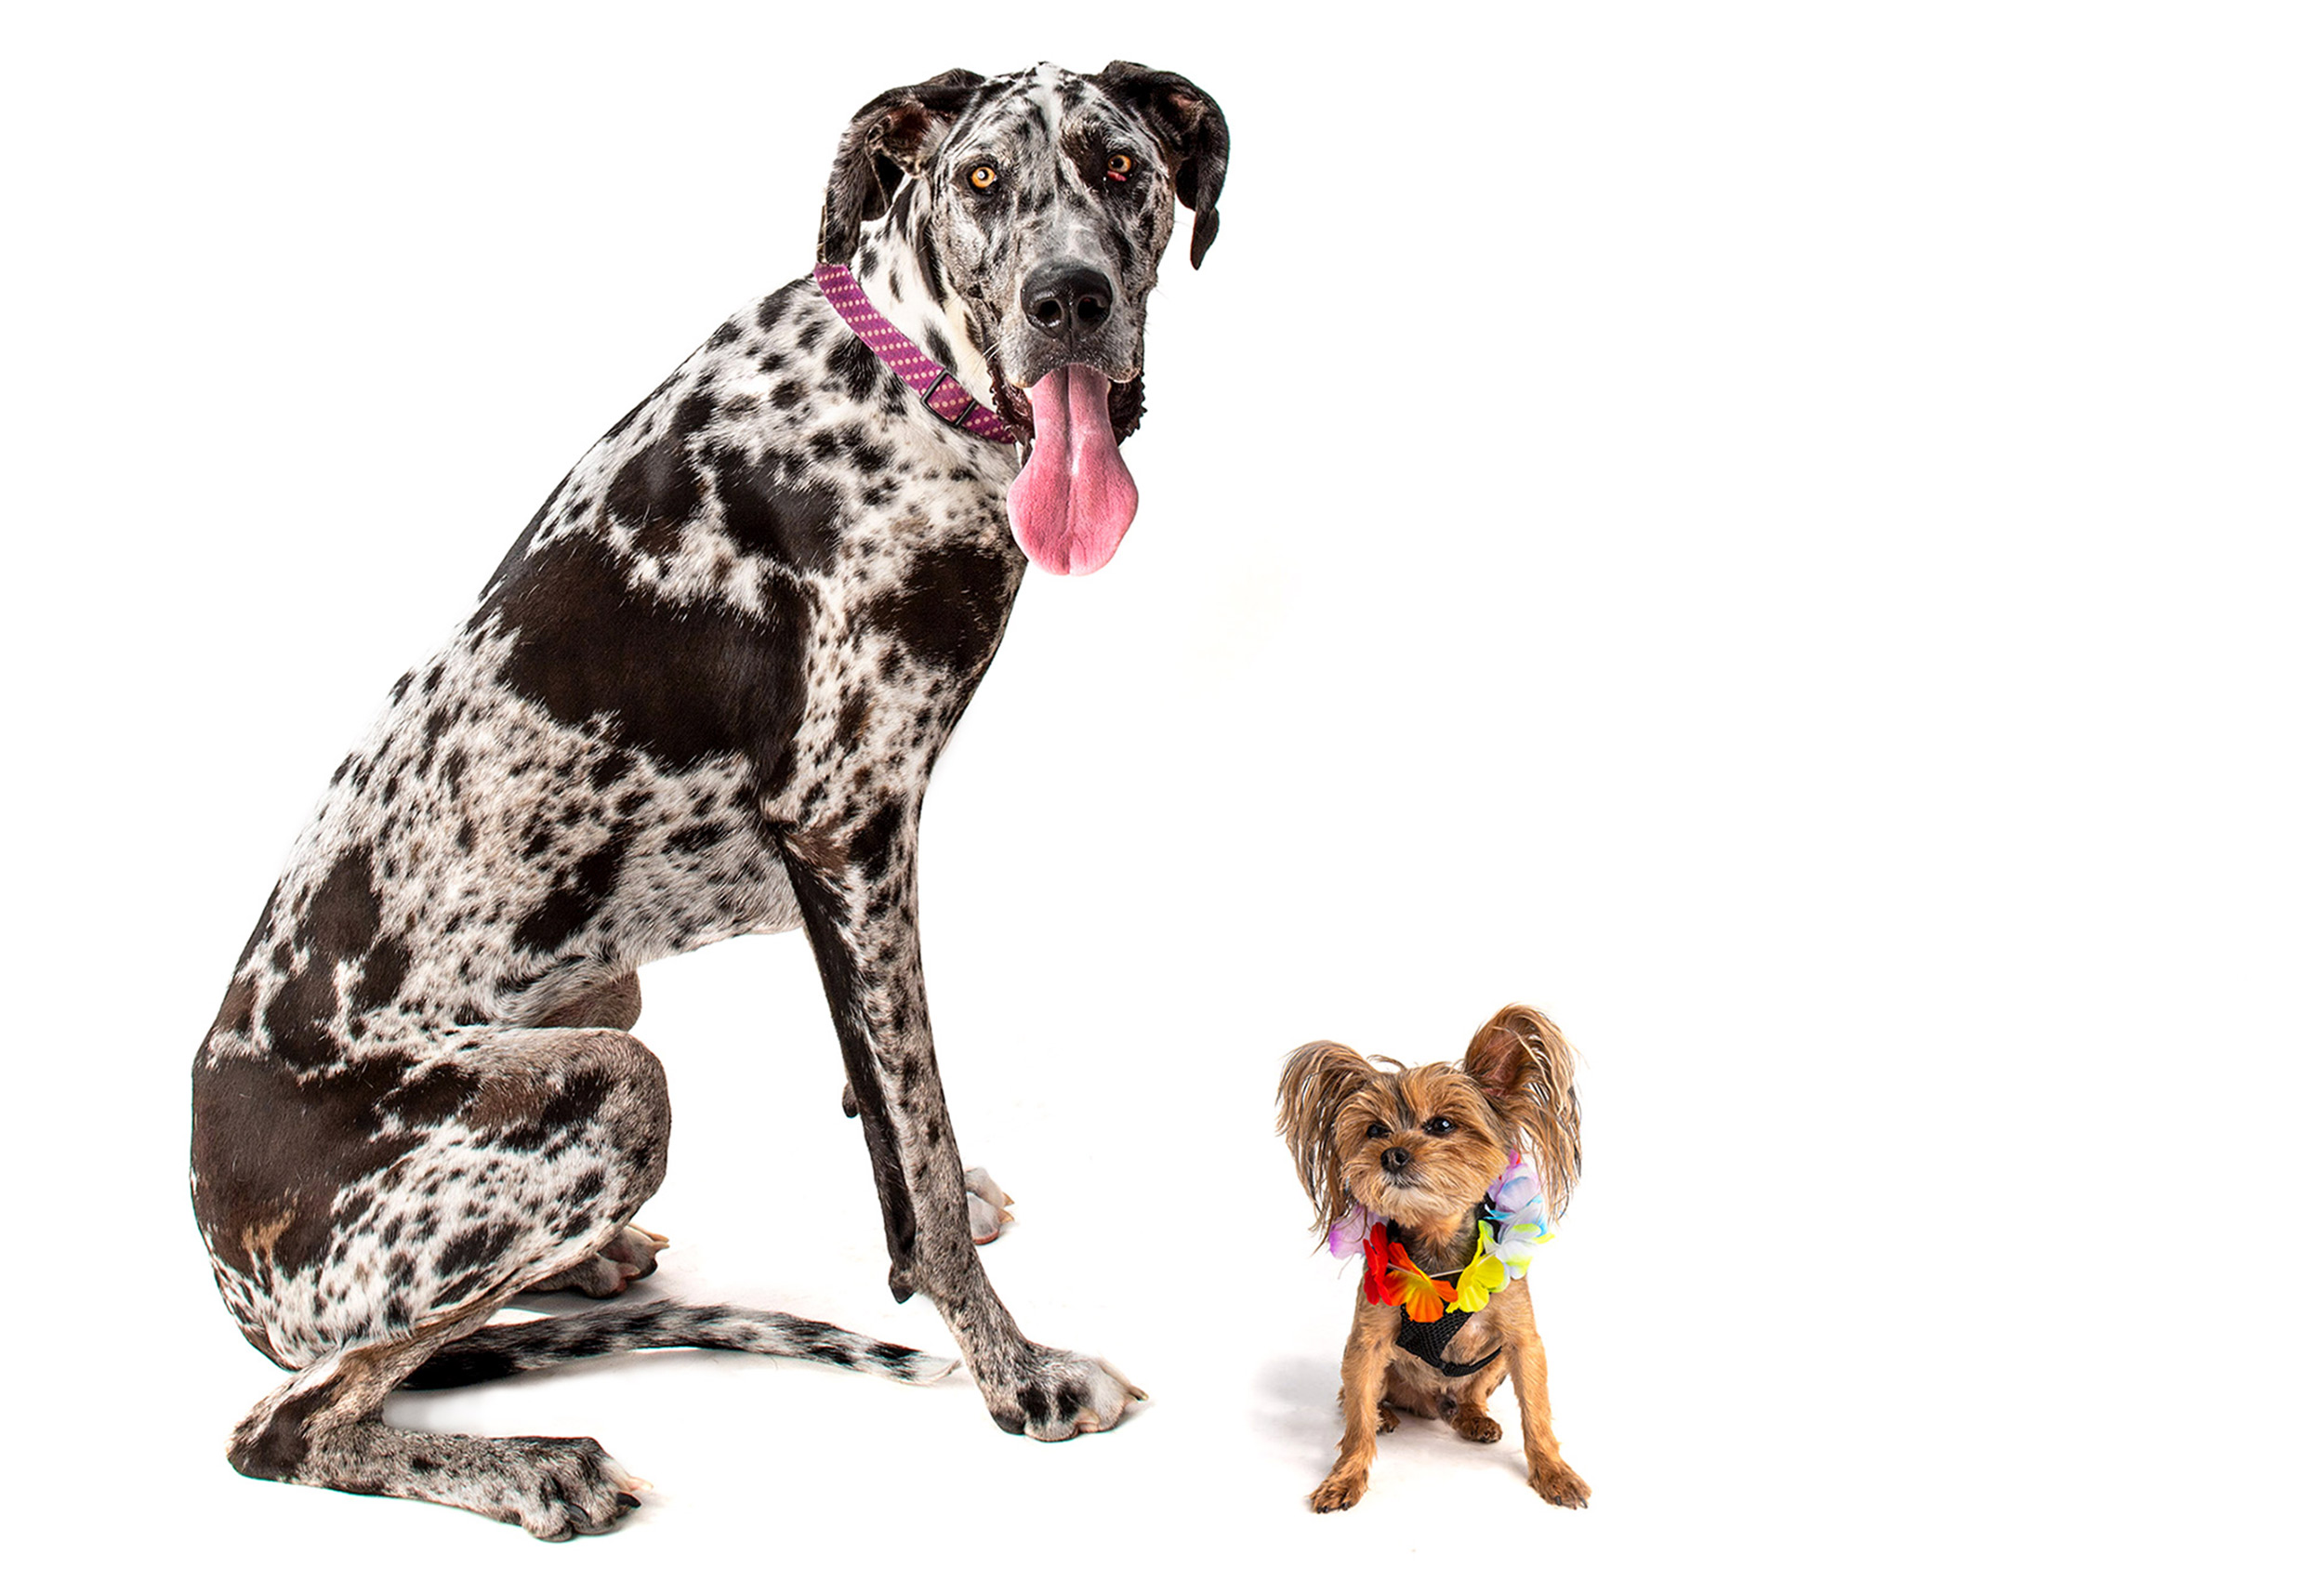 Portrait of Great Dane and Havanese dogs on white background in studio